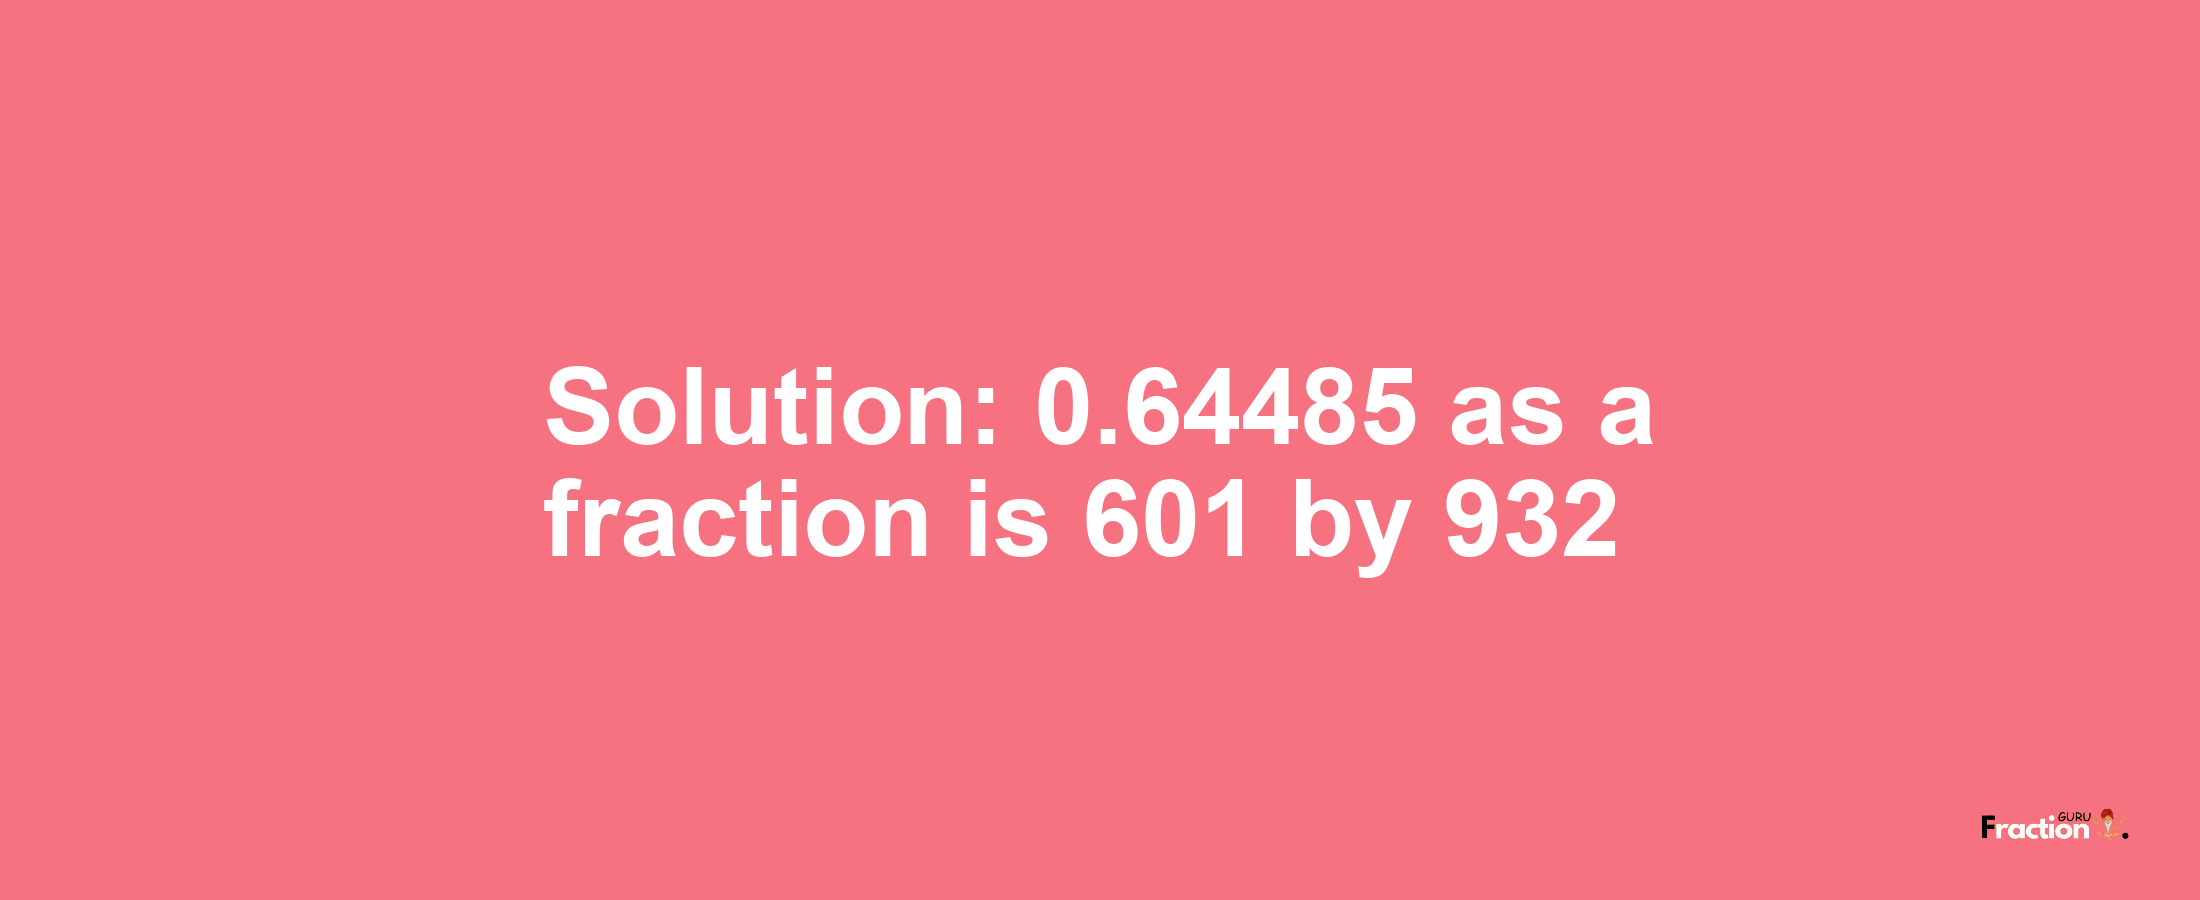 Solution:0.64485 as a fraction is 601/932